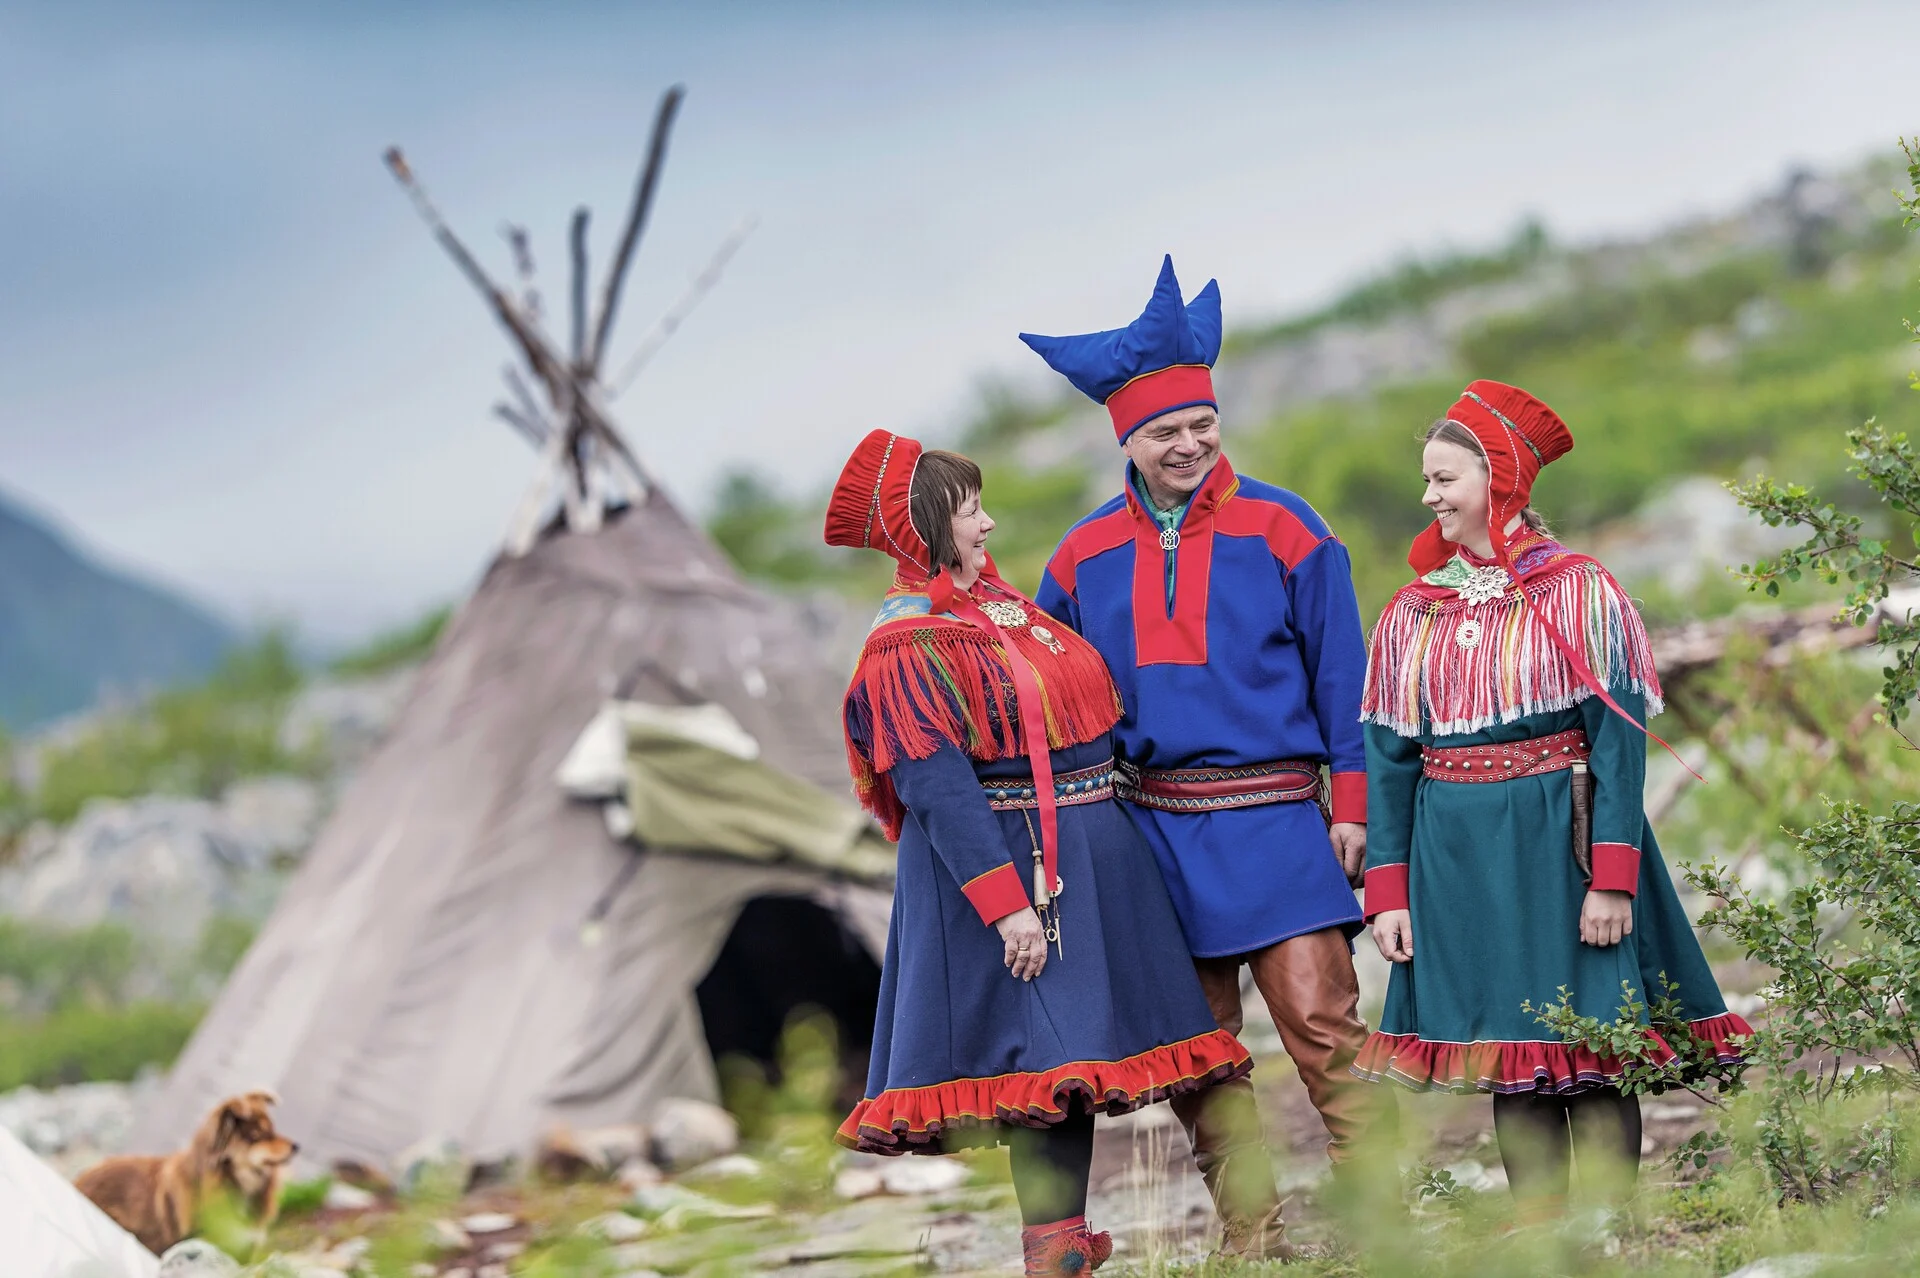 A group of Sami people in traditional dress